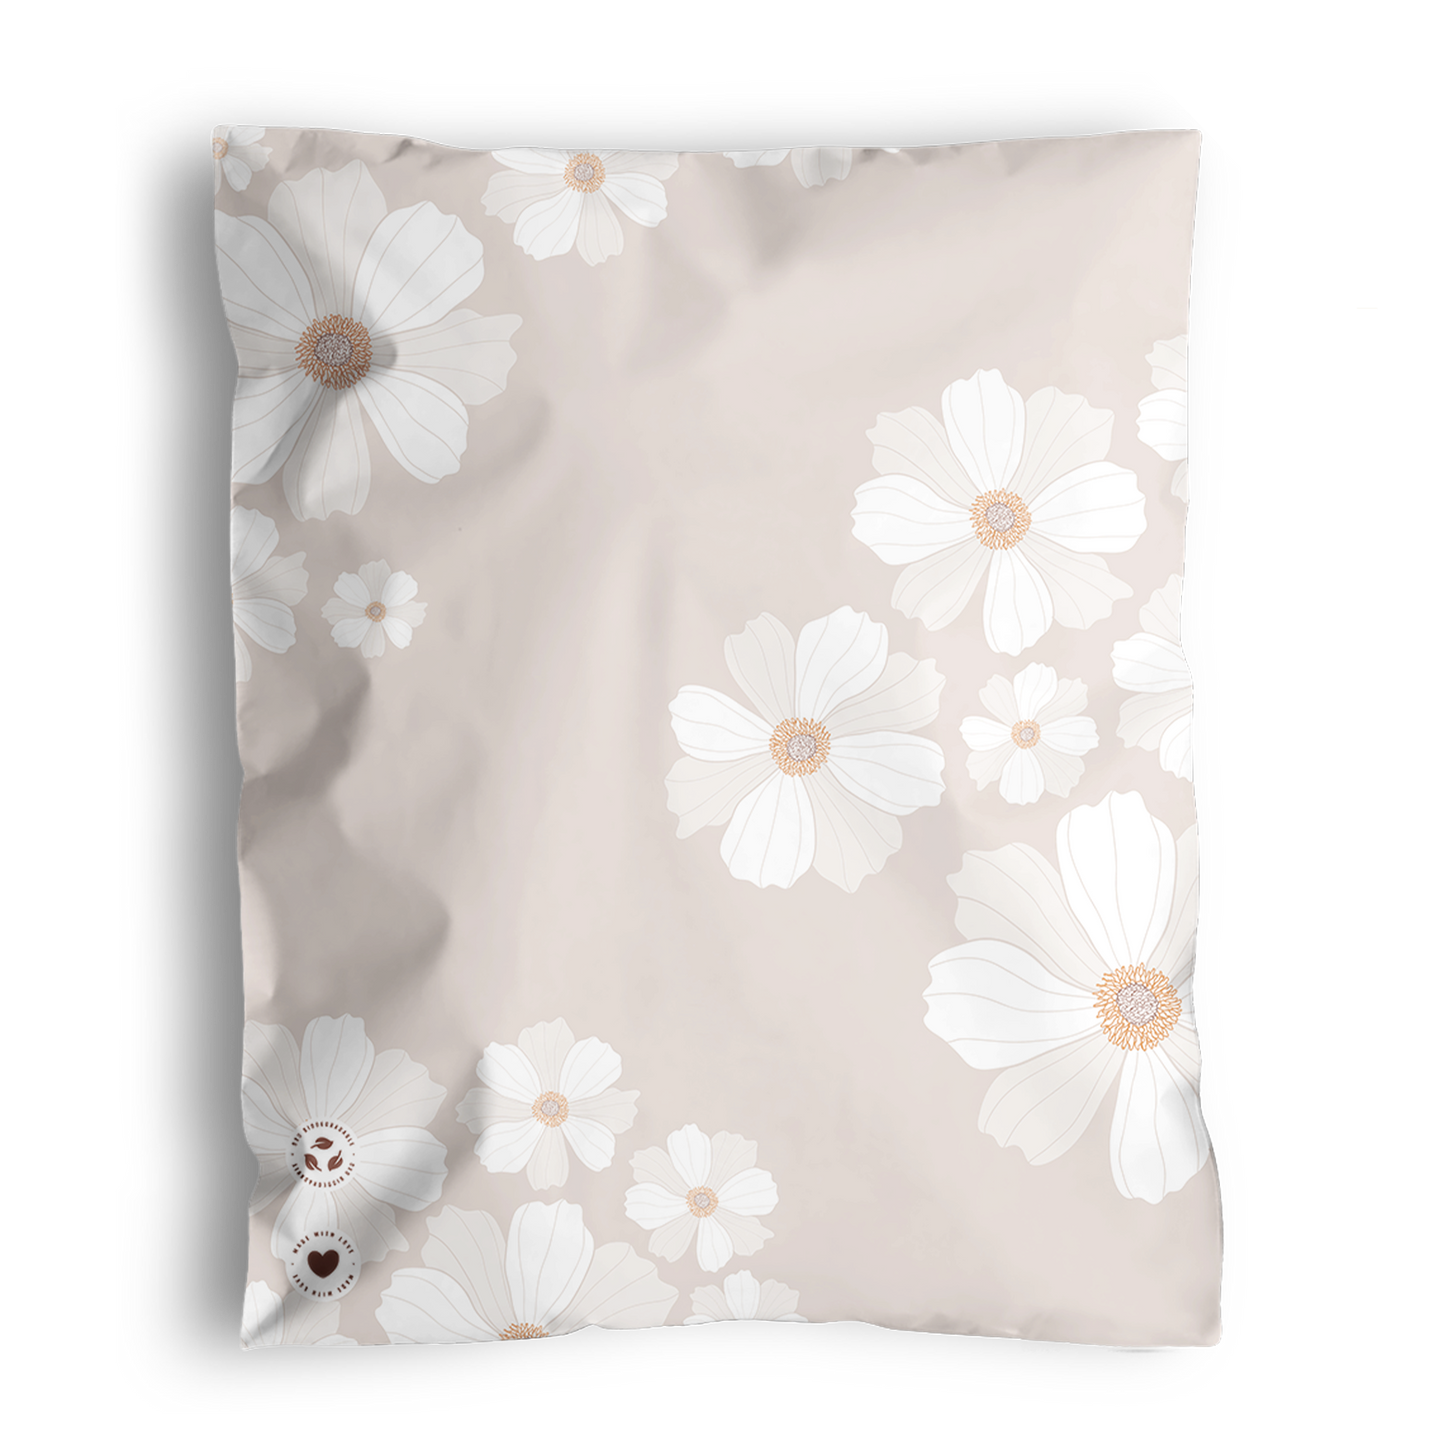 A square pillow with a floral pattern featuring white daisies on a light beige, recyclable background made by impack.co showcasing the Cosmos Biodegradable Mailers 10" x 13".